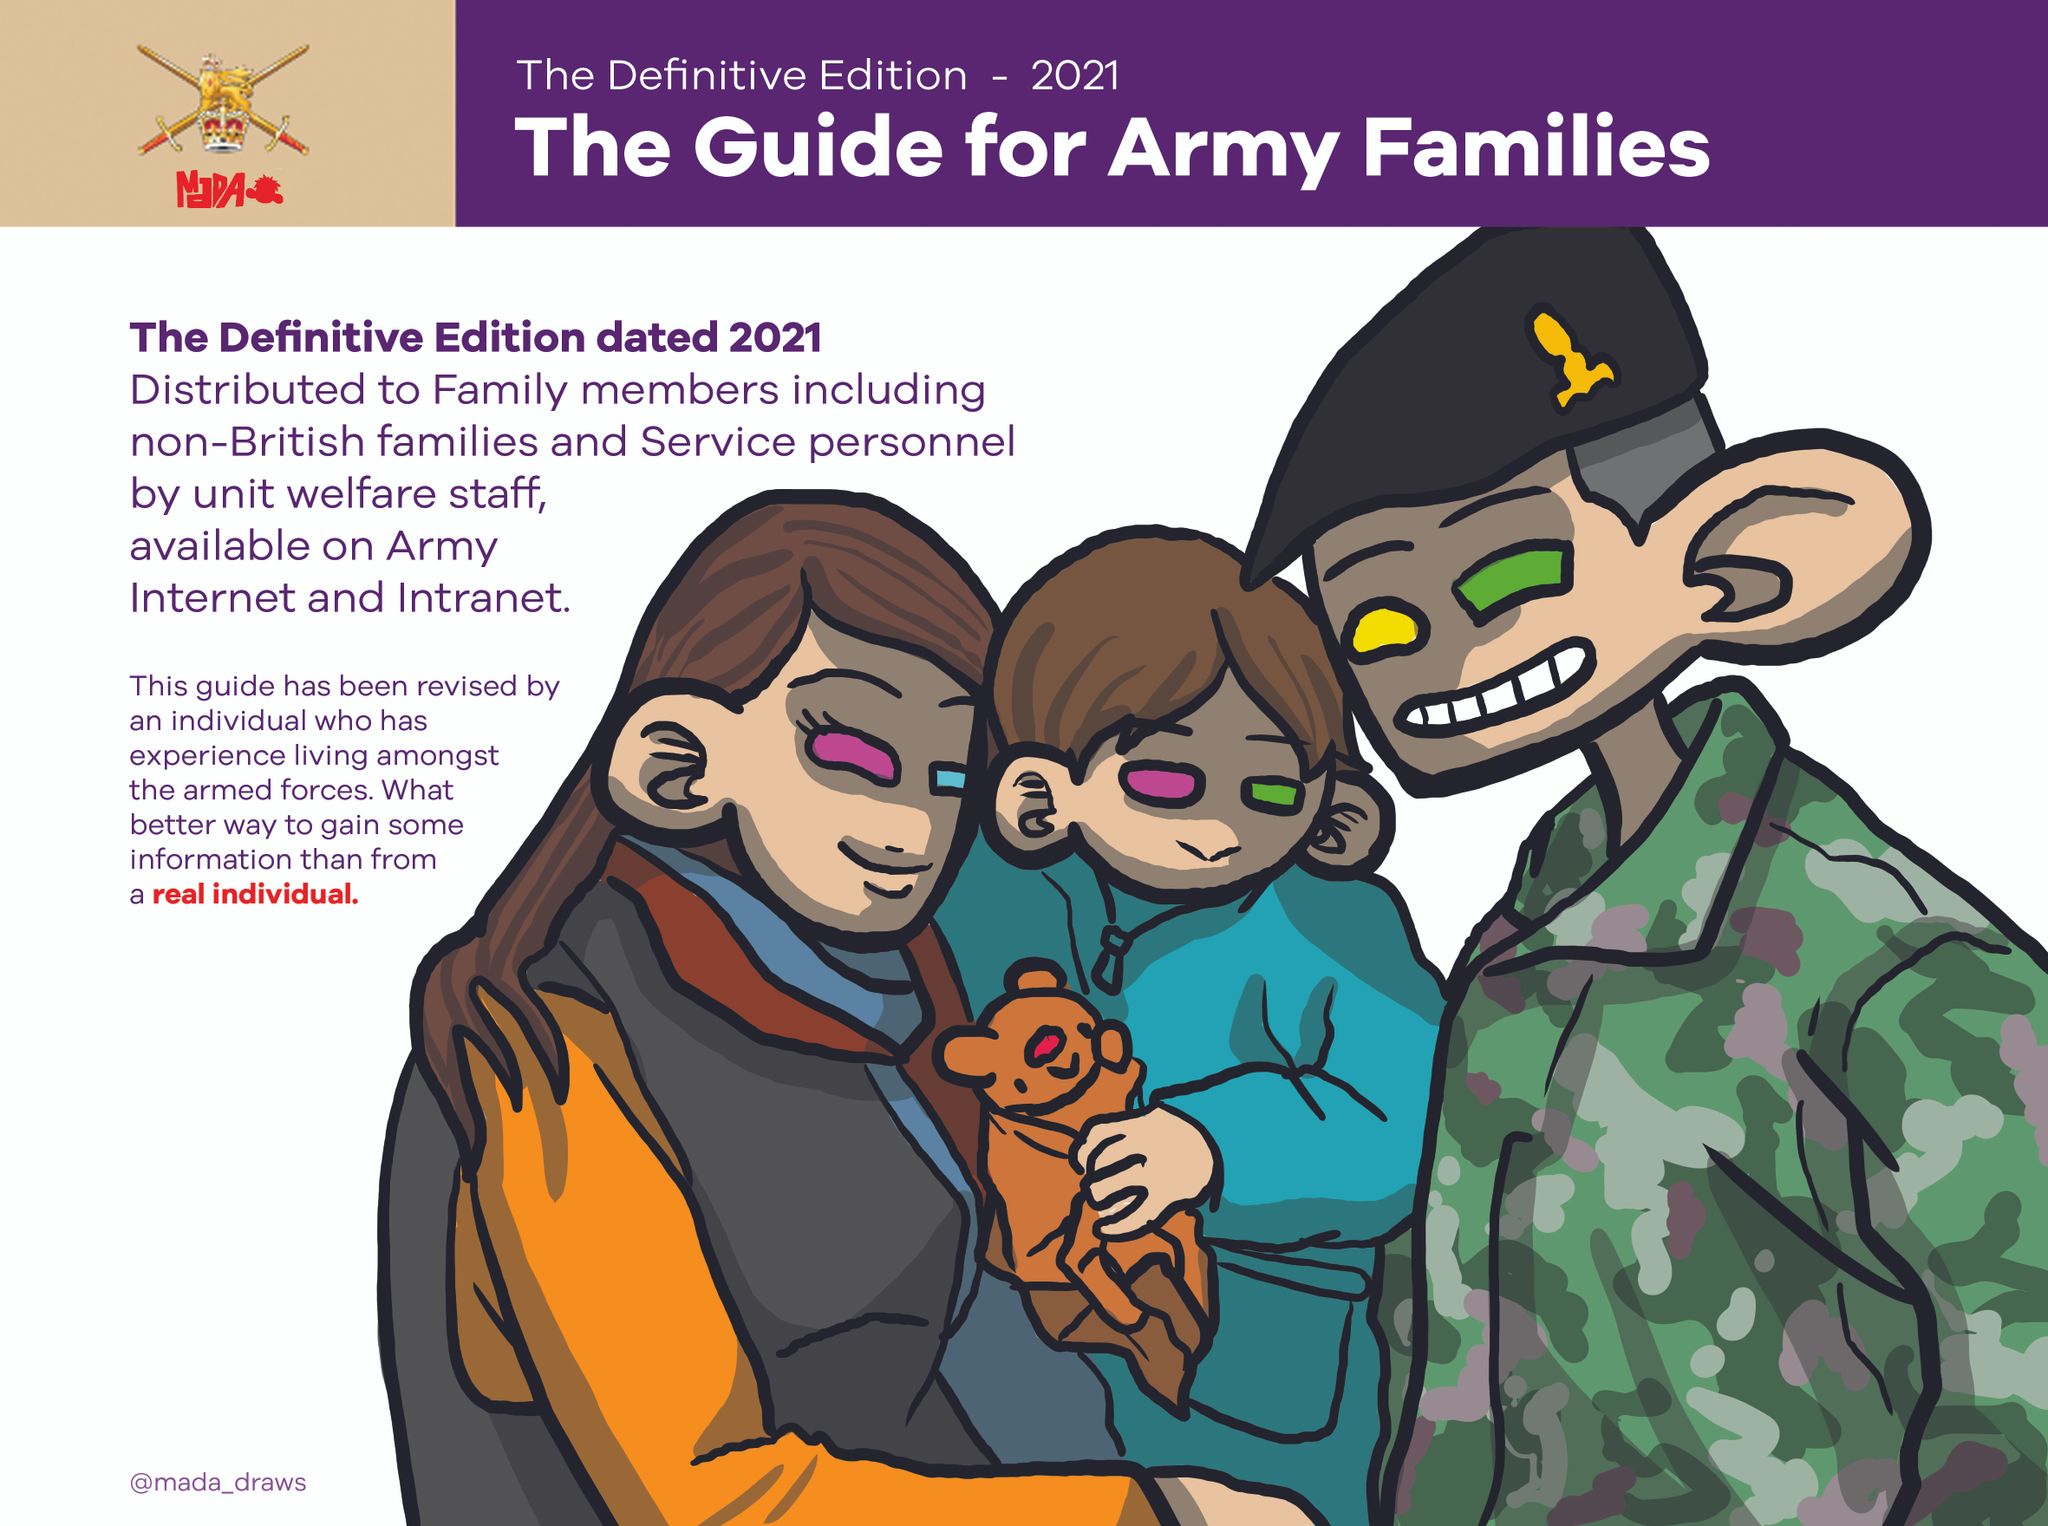 The Guide for Army Families